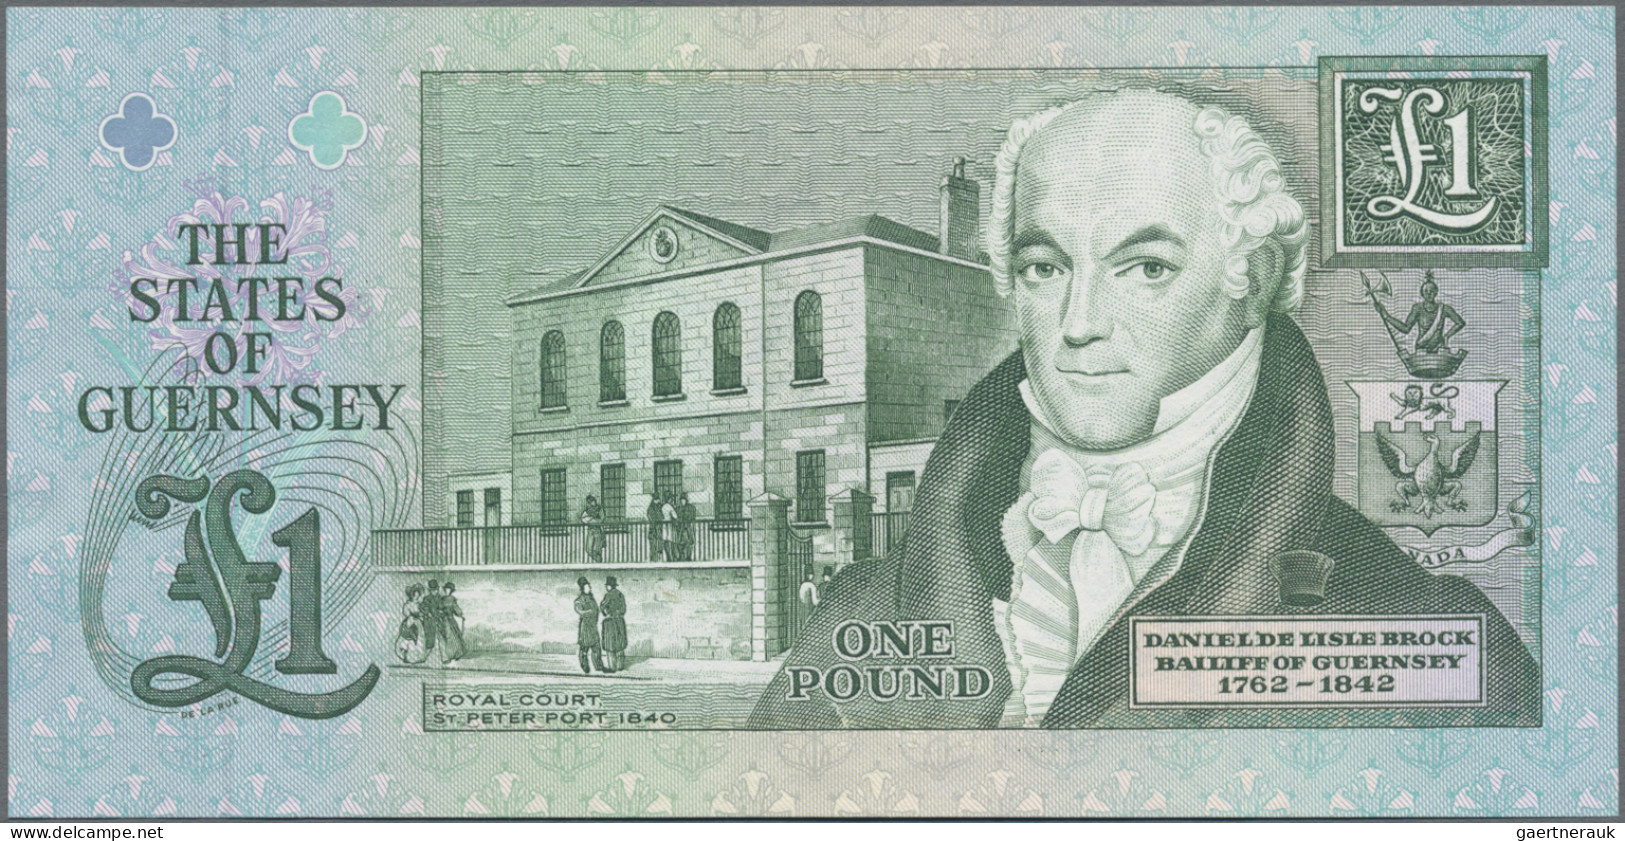 Guernsey: The States of Guernsey, set with 4 banknotes, series ND(1991-2023), wi